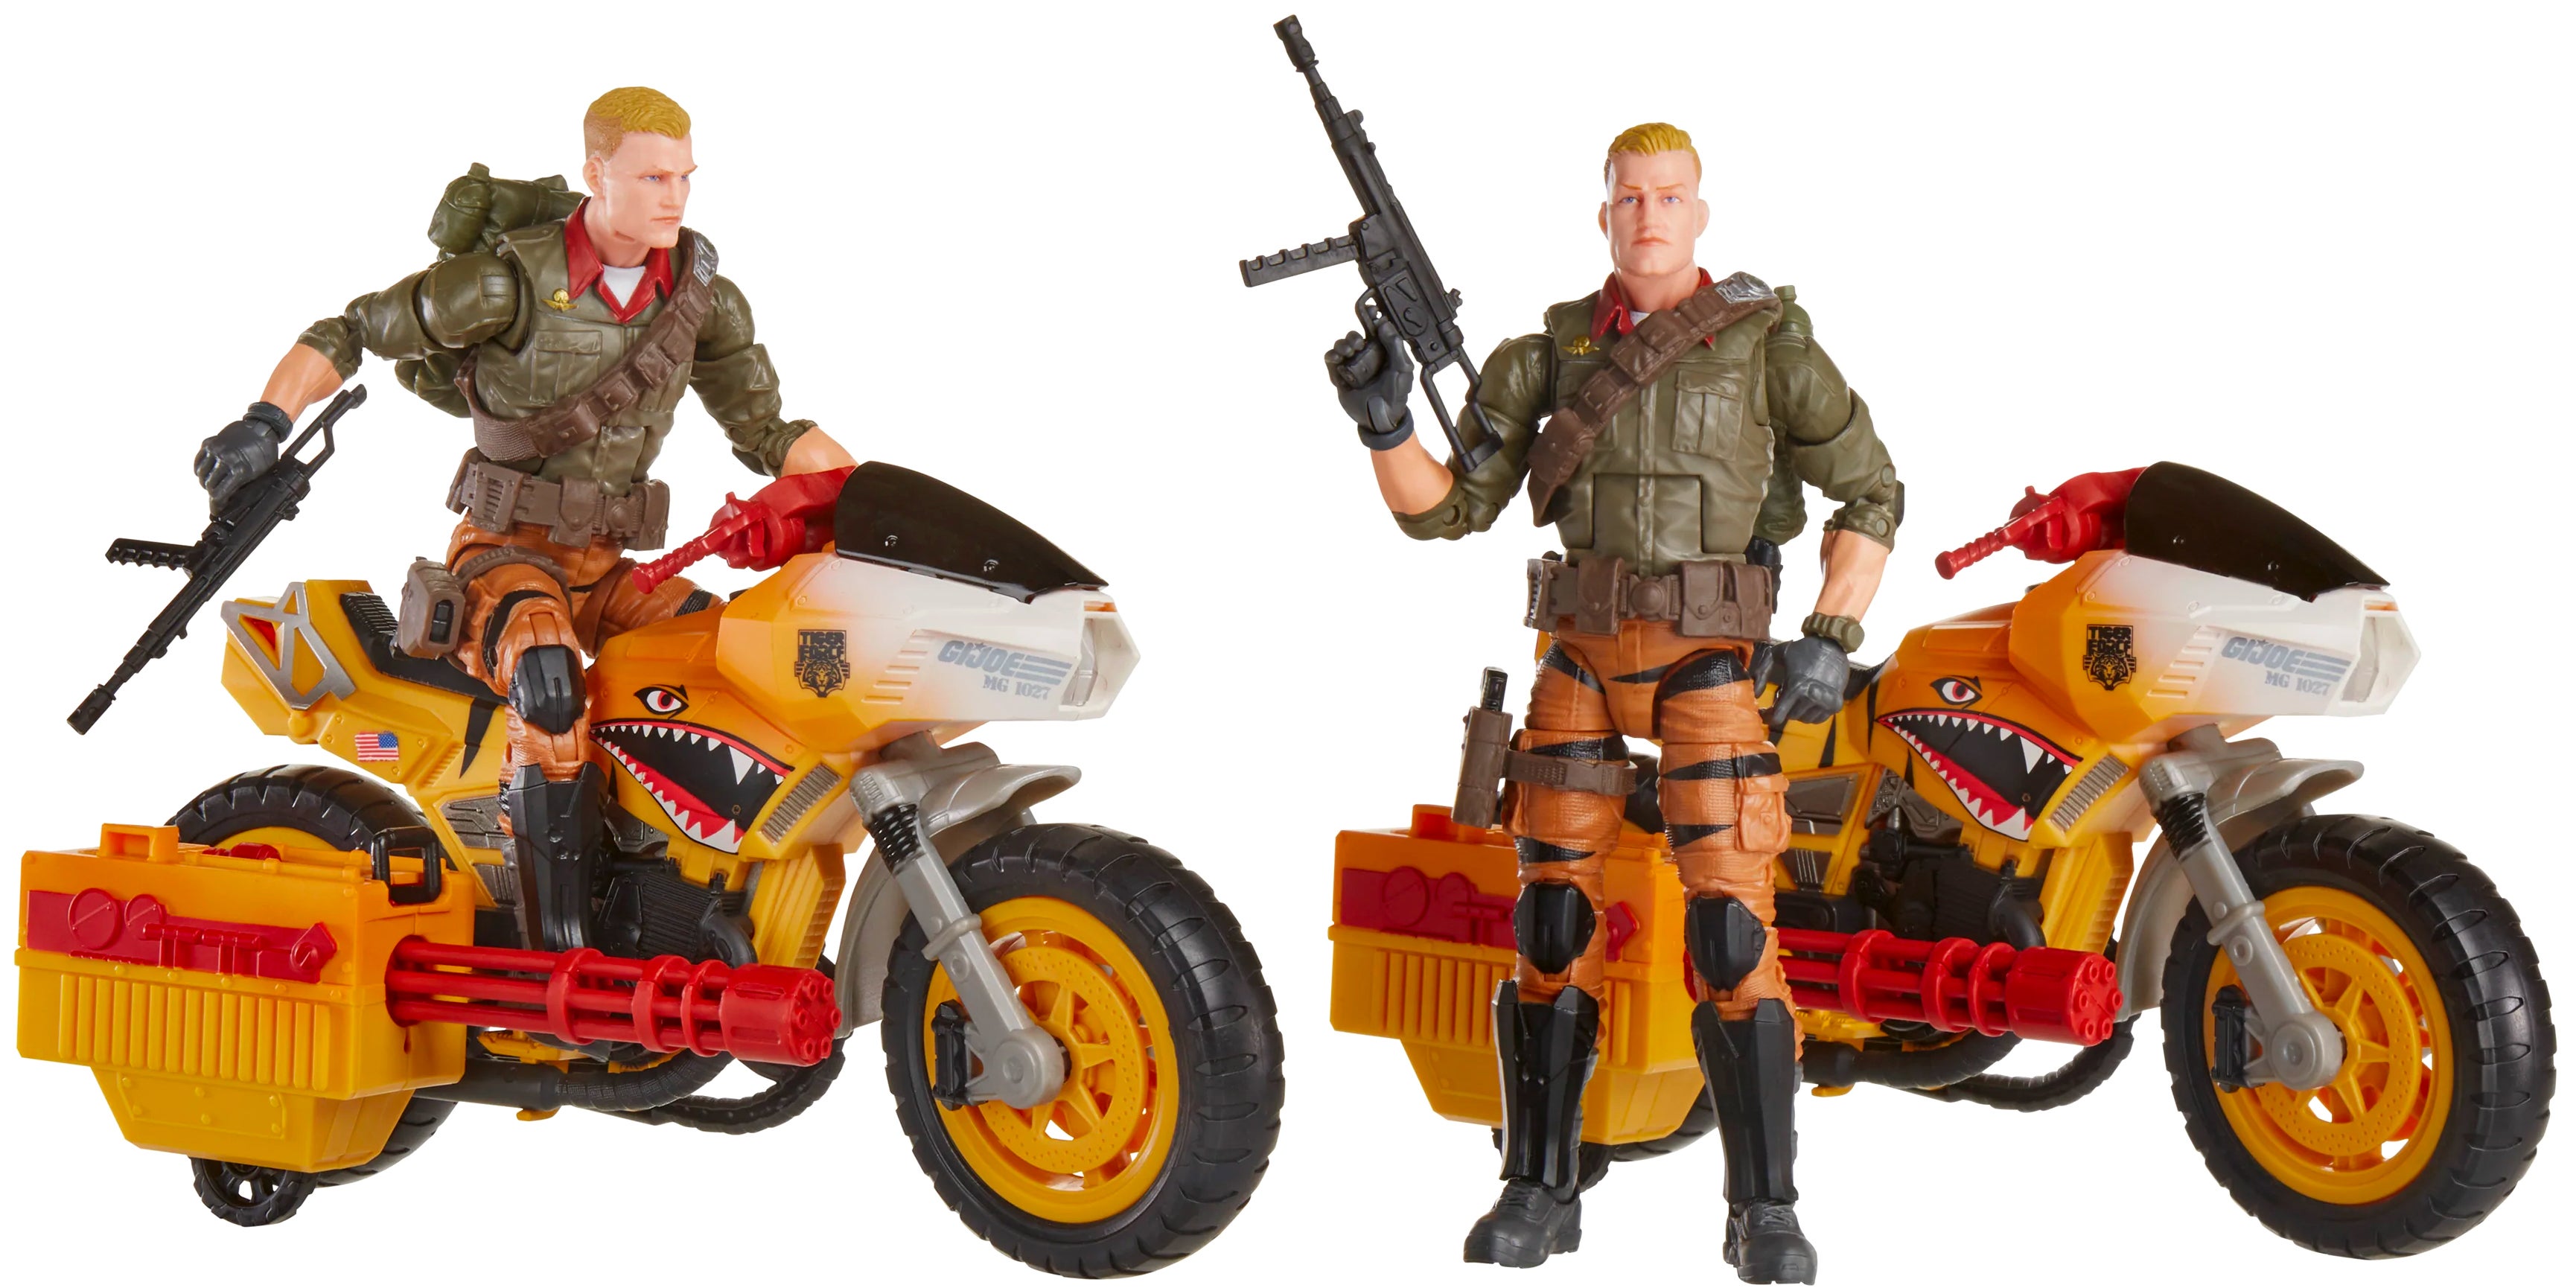 This Week’s Toy News Is a Bounty of Primes and Peters